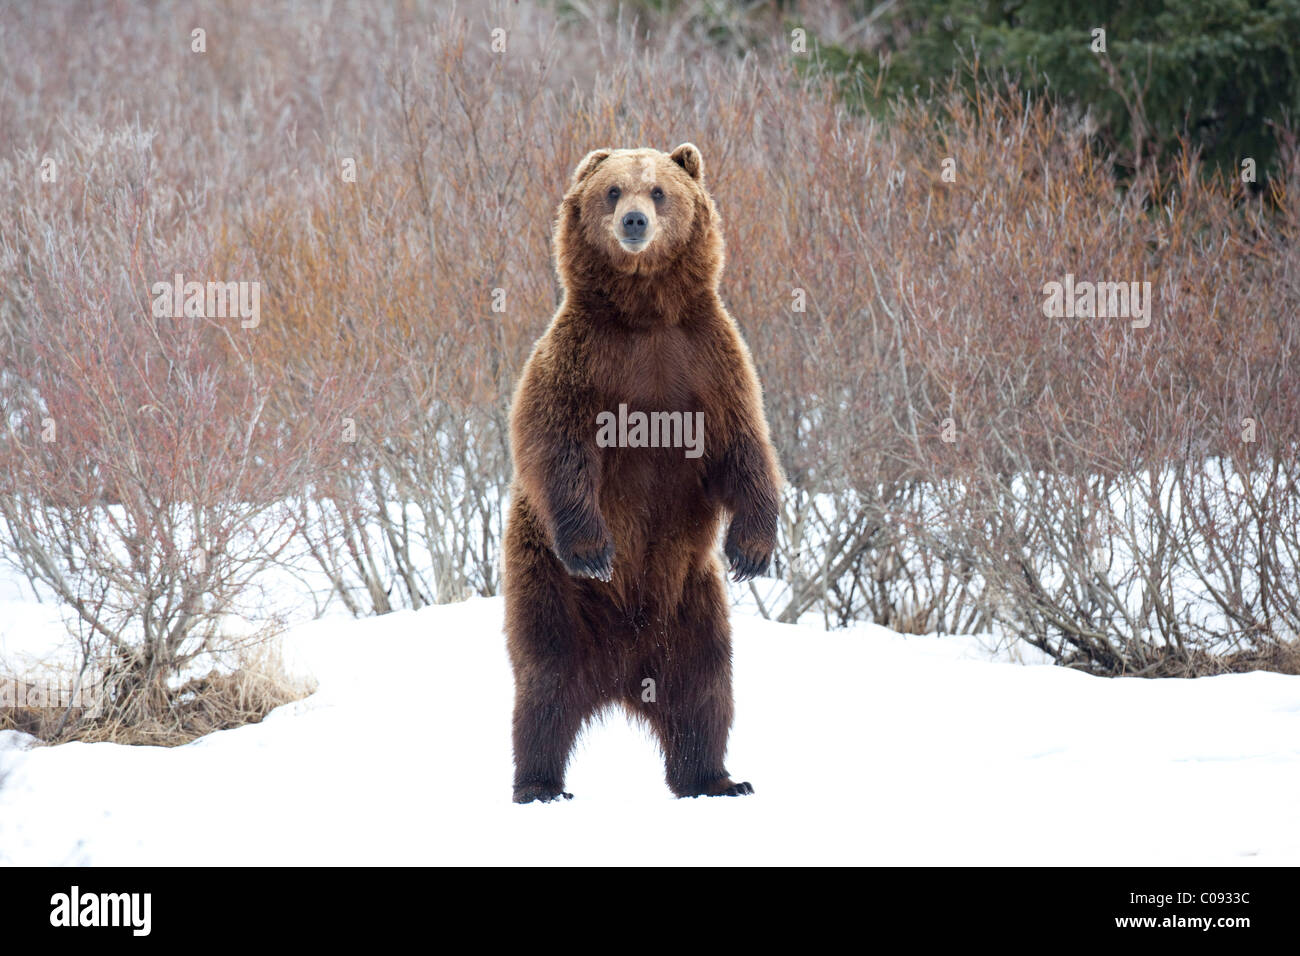 View of an adult Brown bear standing upright in snow at the Alaska Wildlife Conservation Center near Portage, CAPTIVE Stock Photo